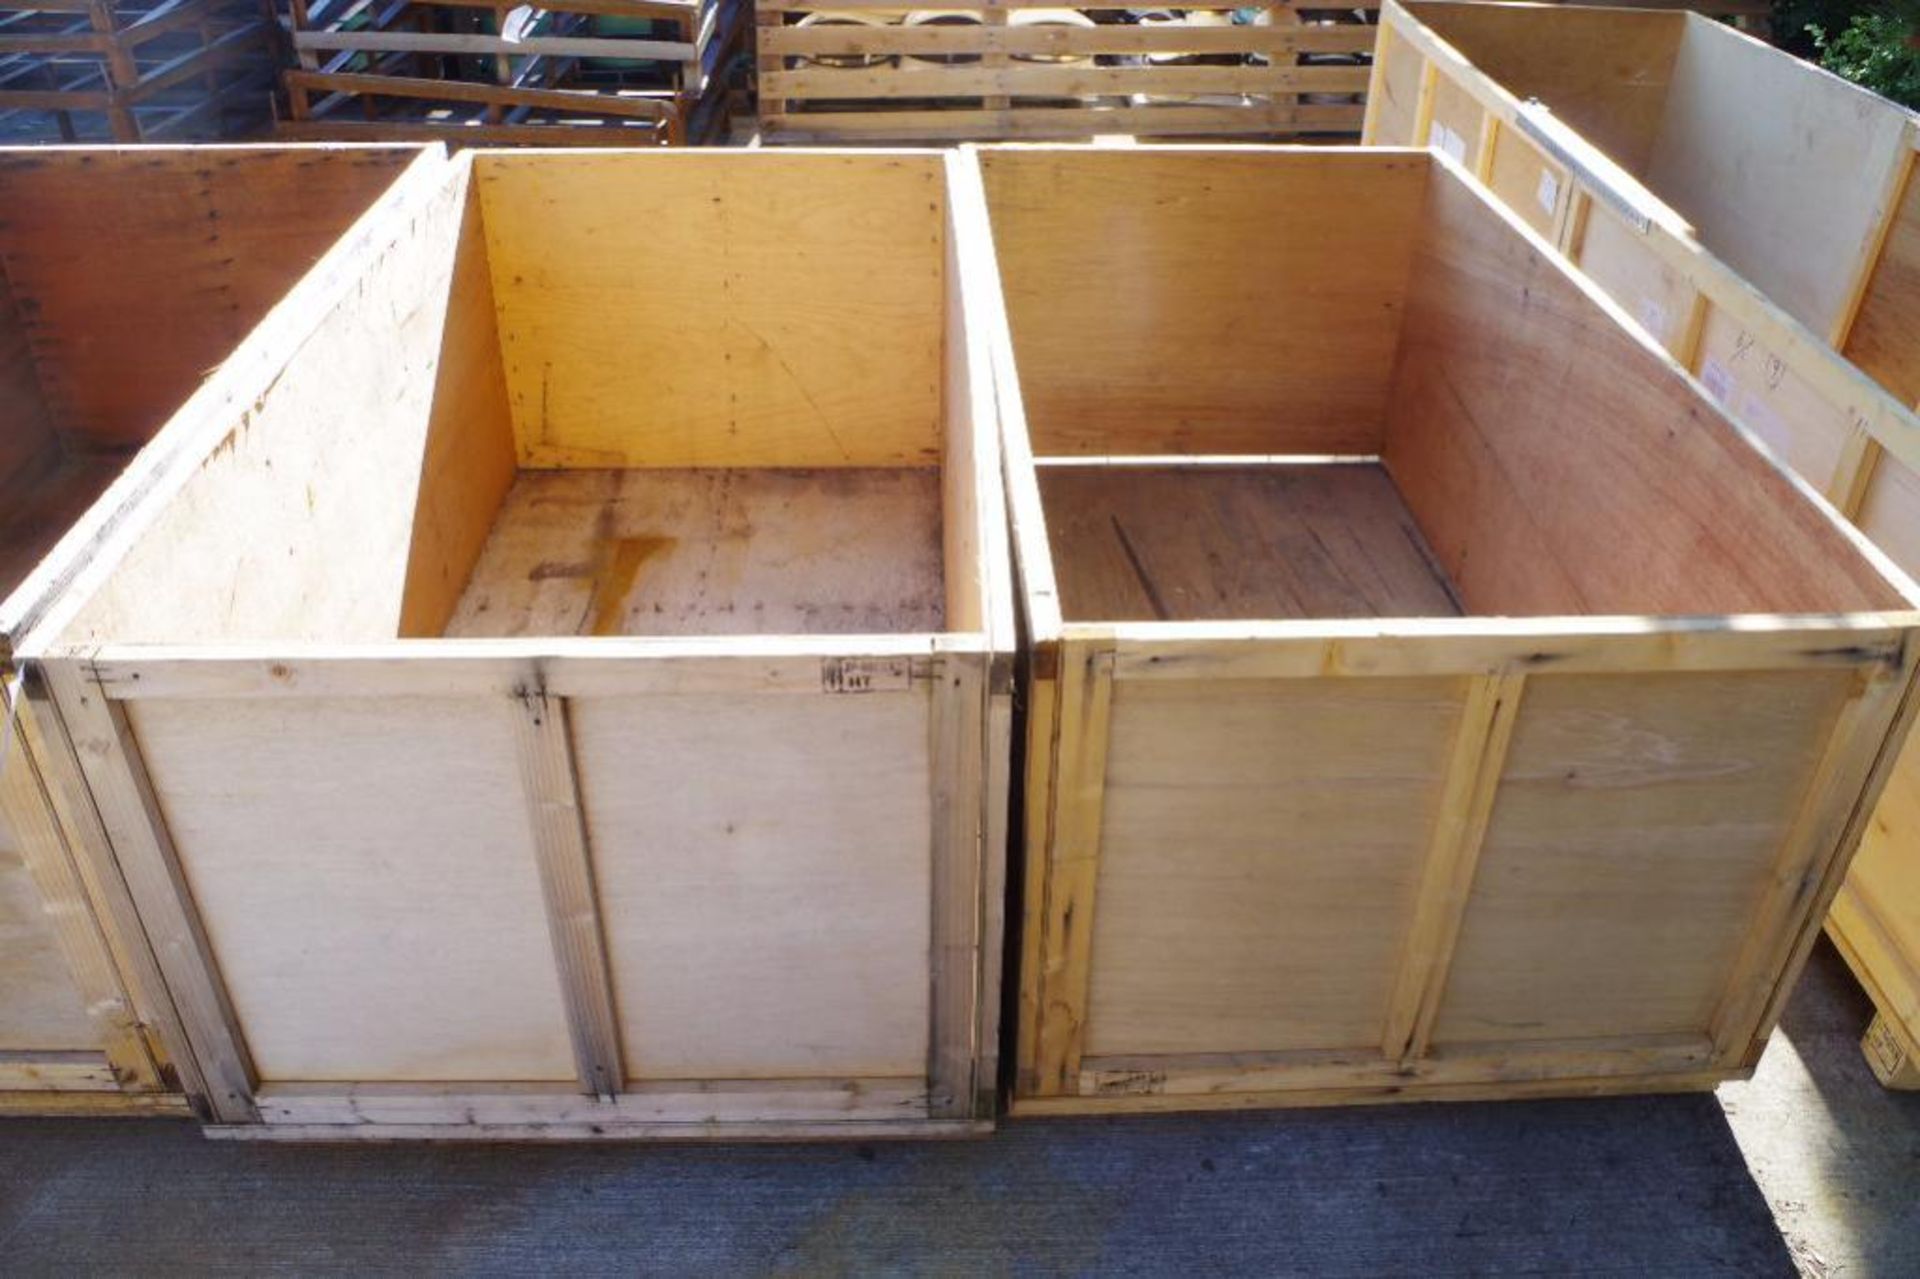 (2) Large Wood Containers, Approx. 61"L x 33.5"W x 27"H